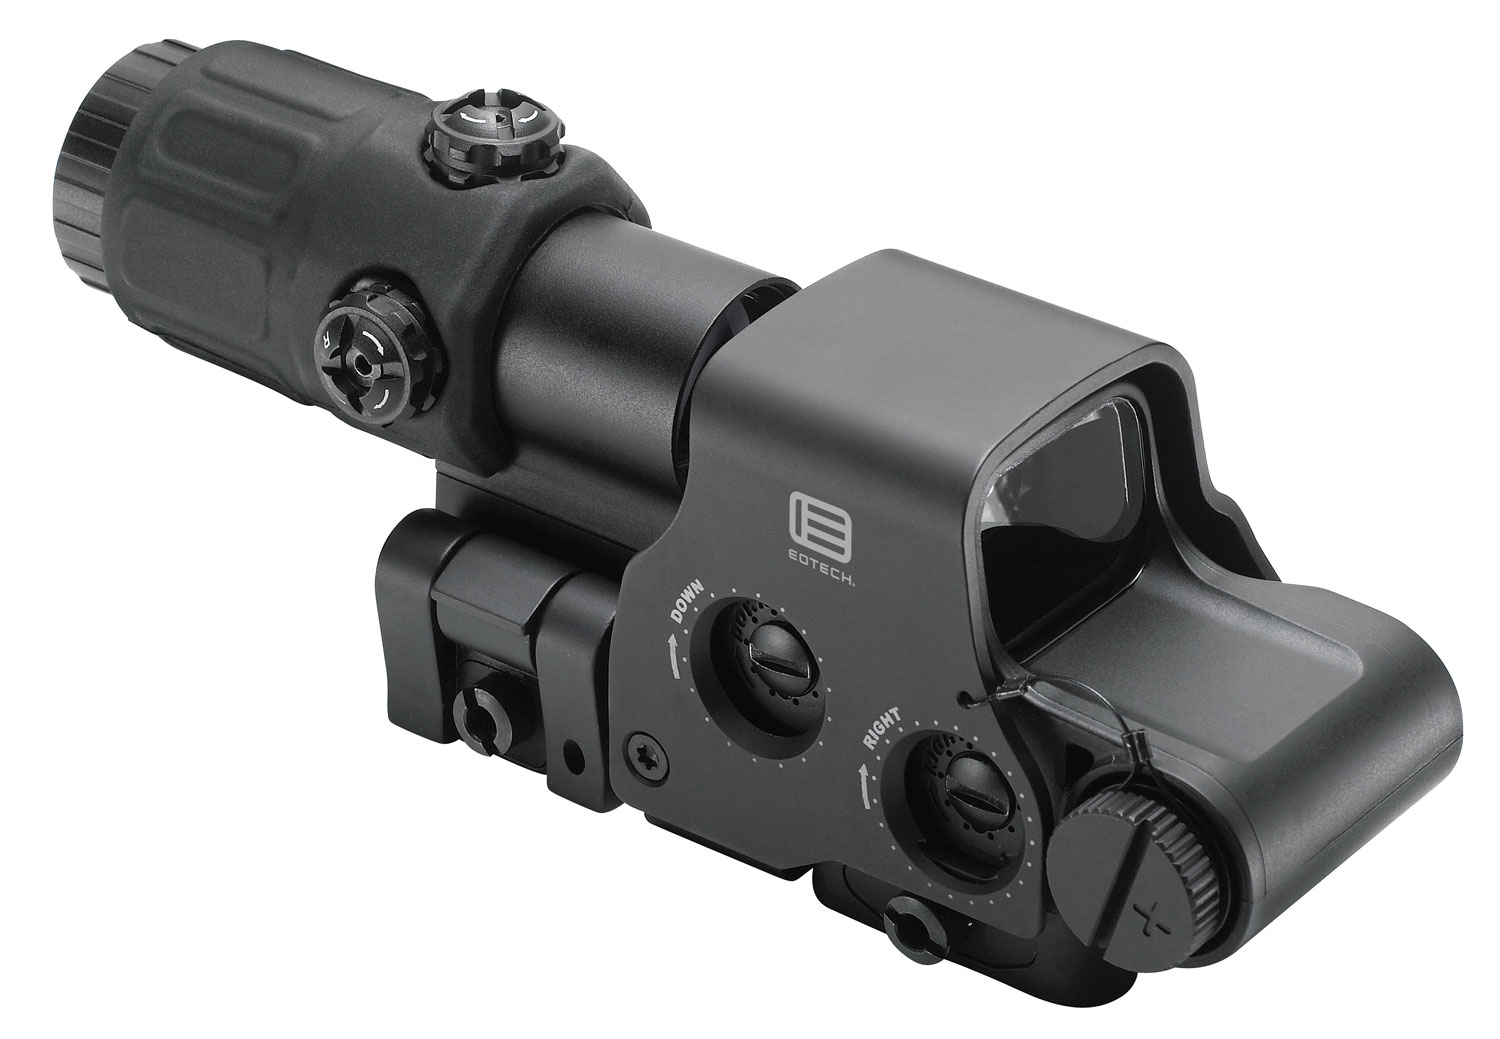 Eotech HHSI EXPS3 w/G33 Magnifier Matte Black 1x 1 MOA 68 MOA Ring/4 Red Dots Reticle Features Switch-to-Side Mounting System